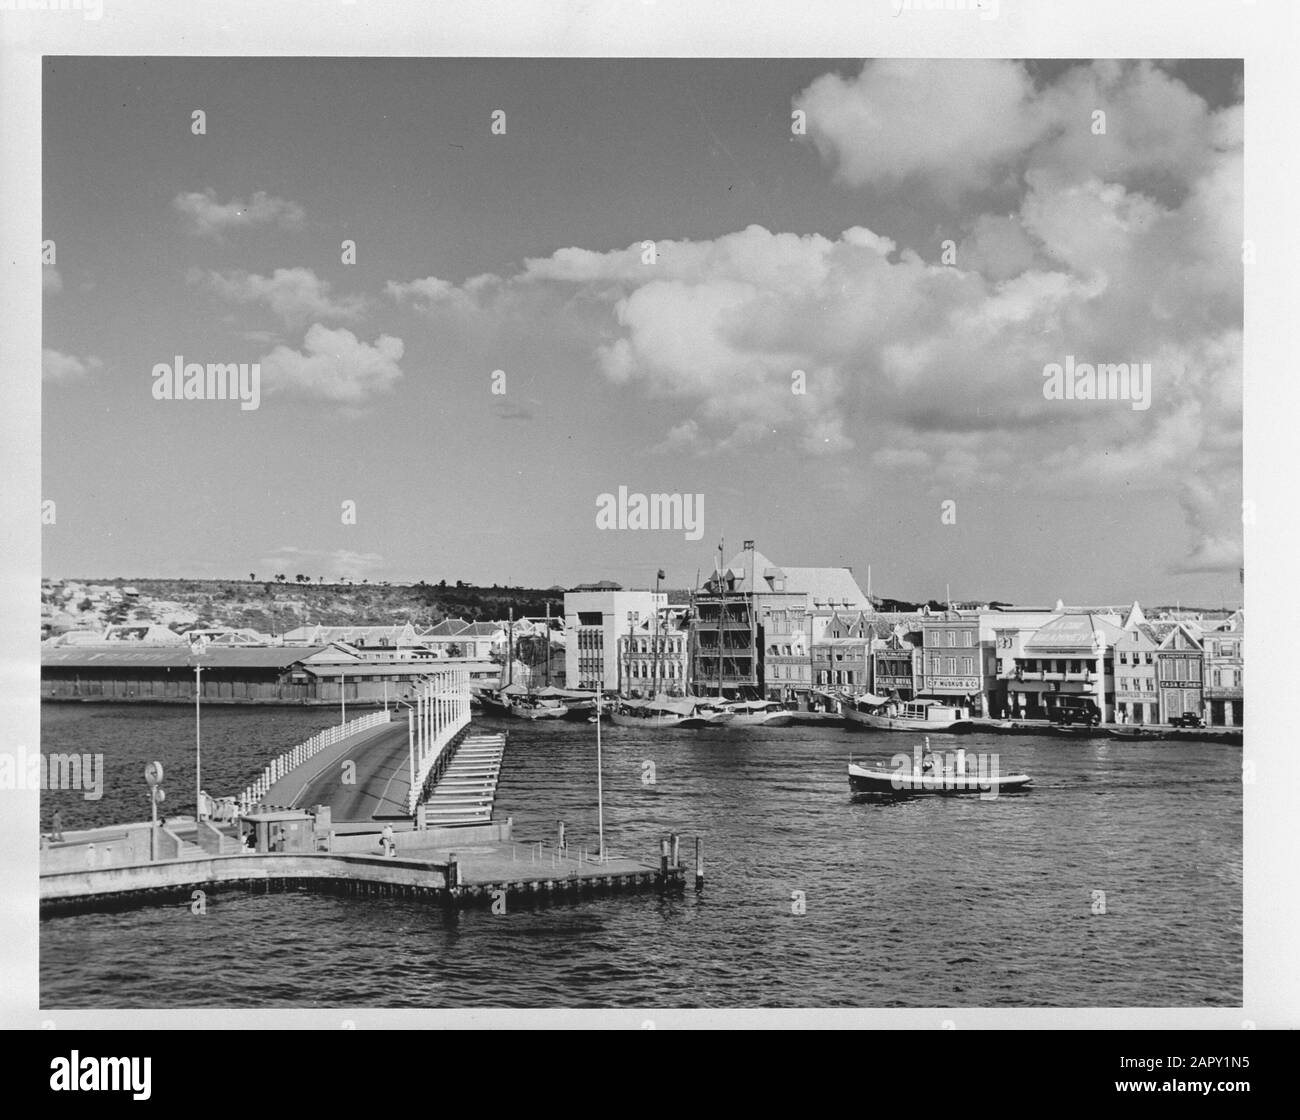 Wi [West Indies]/Anefo London series  Willemstad (Curaçao). View of the Emma Bridge, a pontoon bridge over the Sint Annabaai. When opened, it can pass ships up to 30,000 tons to the Schottegat lagoon where the major oil refineries are located Annotation: Repronegative Date: {1940-1945} Location: Curaçao, Willemstad Keywords: bridges, capitals, World War II Stock Photo